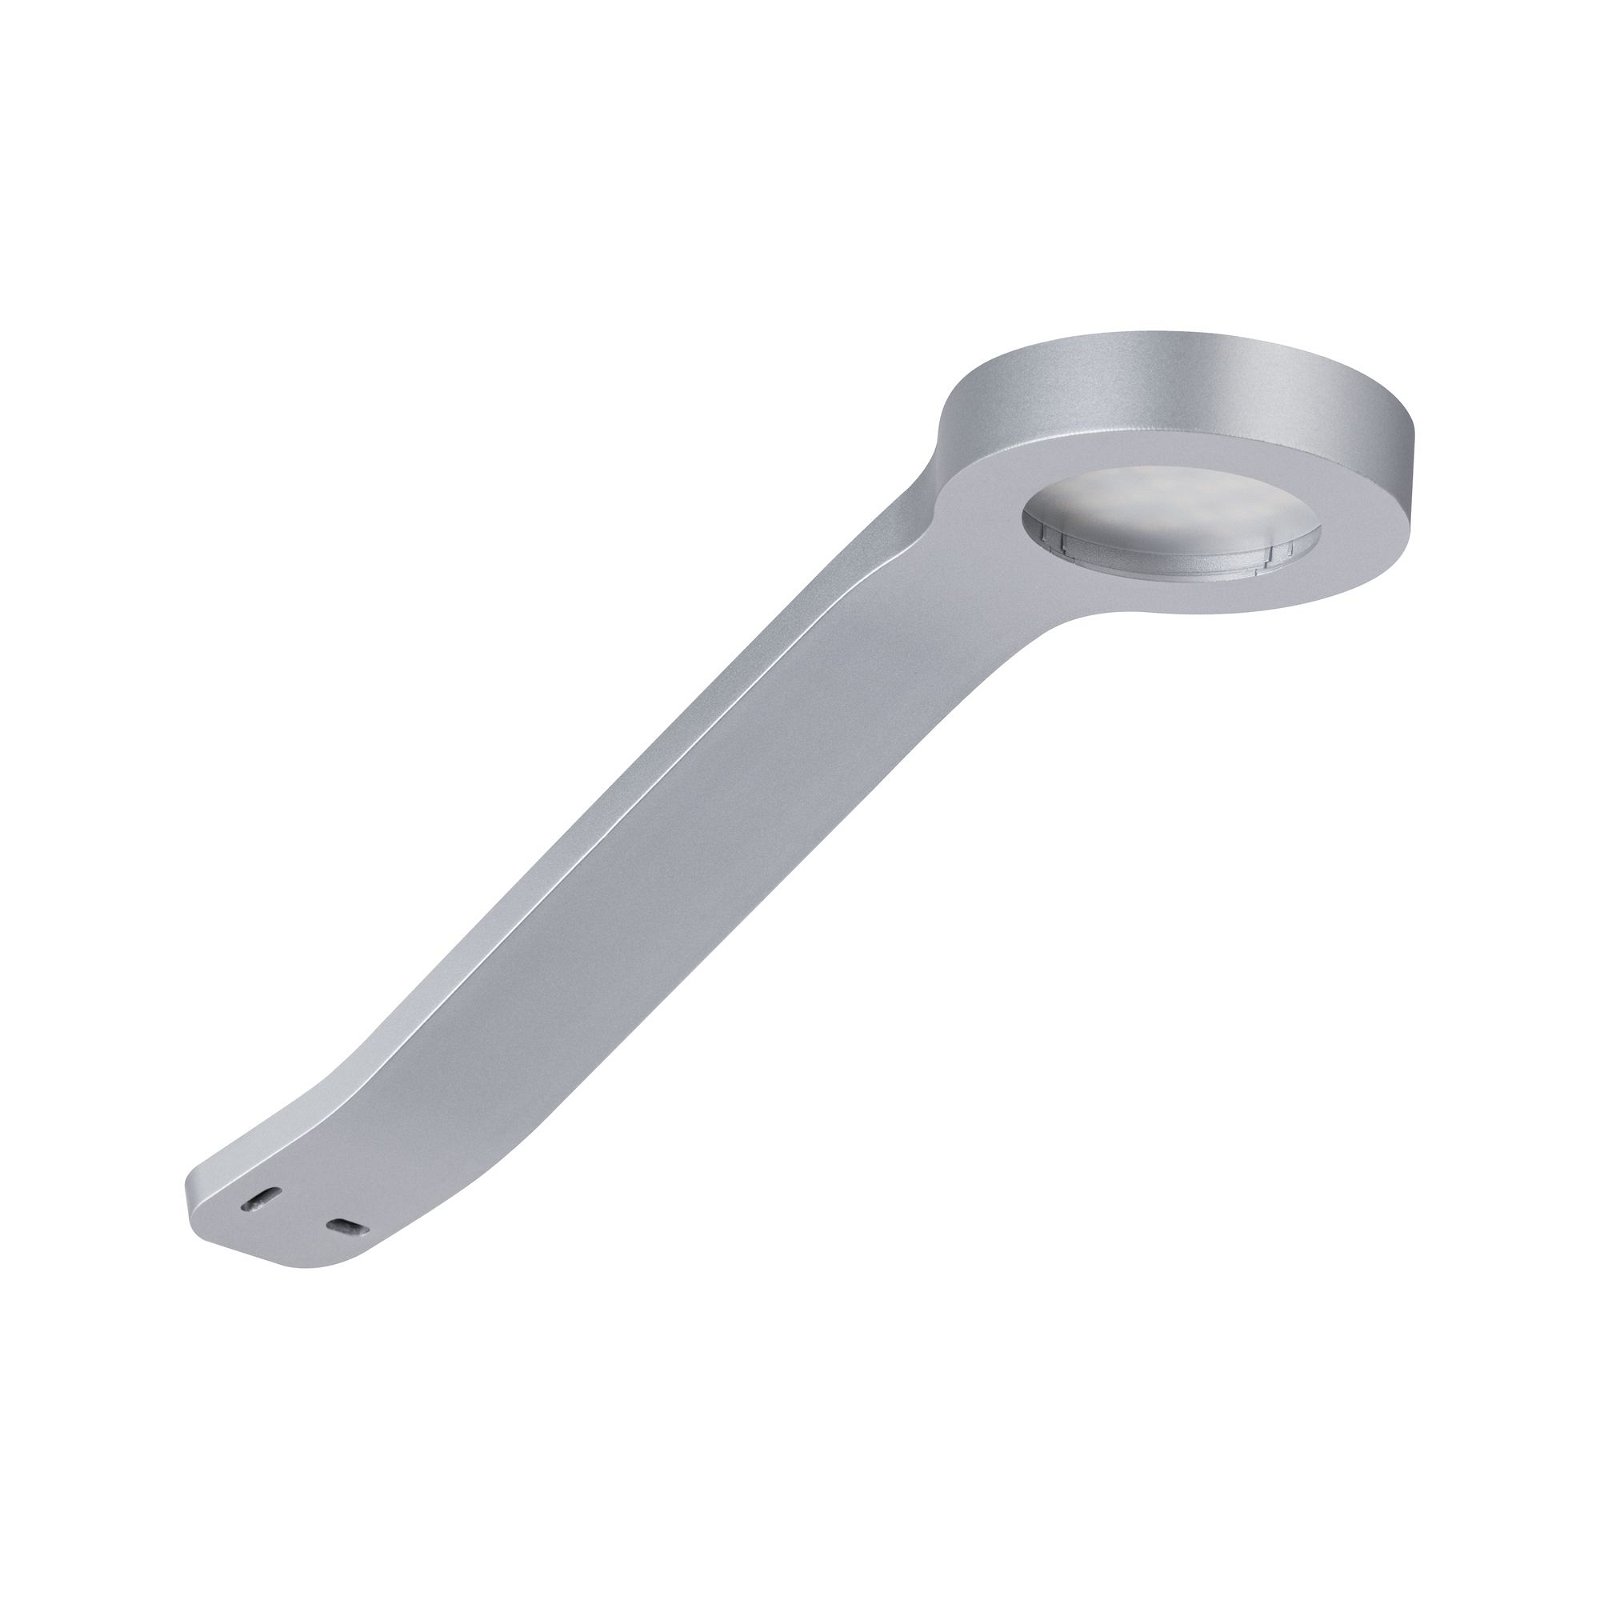 Clever Connect LED Spot Mike Tunable White 2W Chrome matt